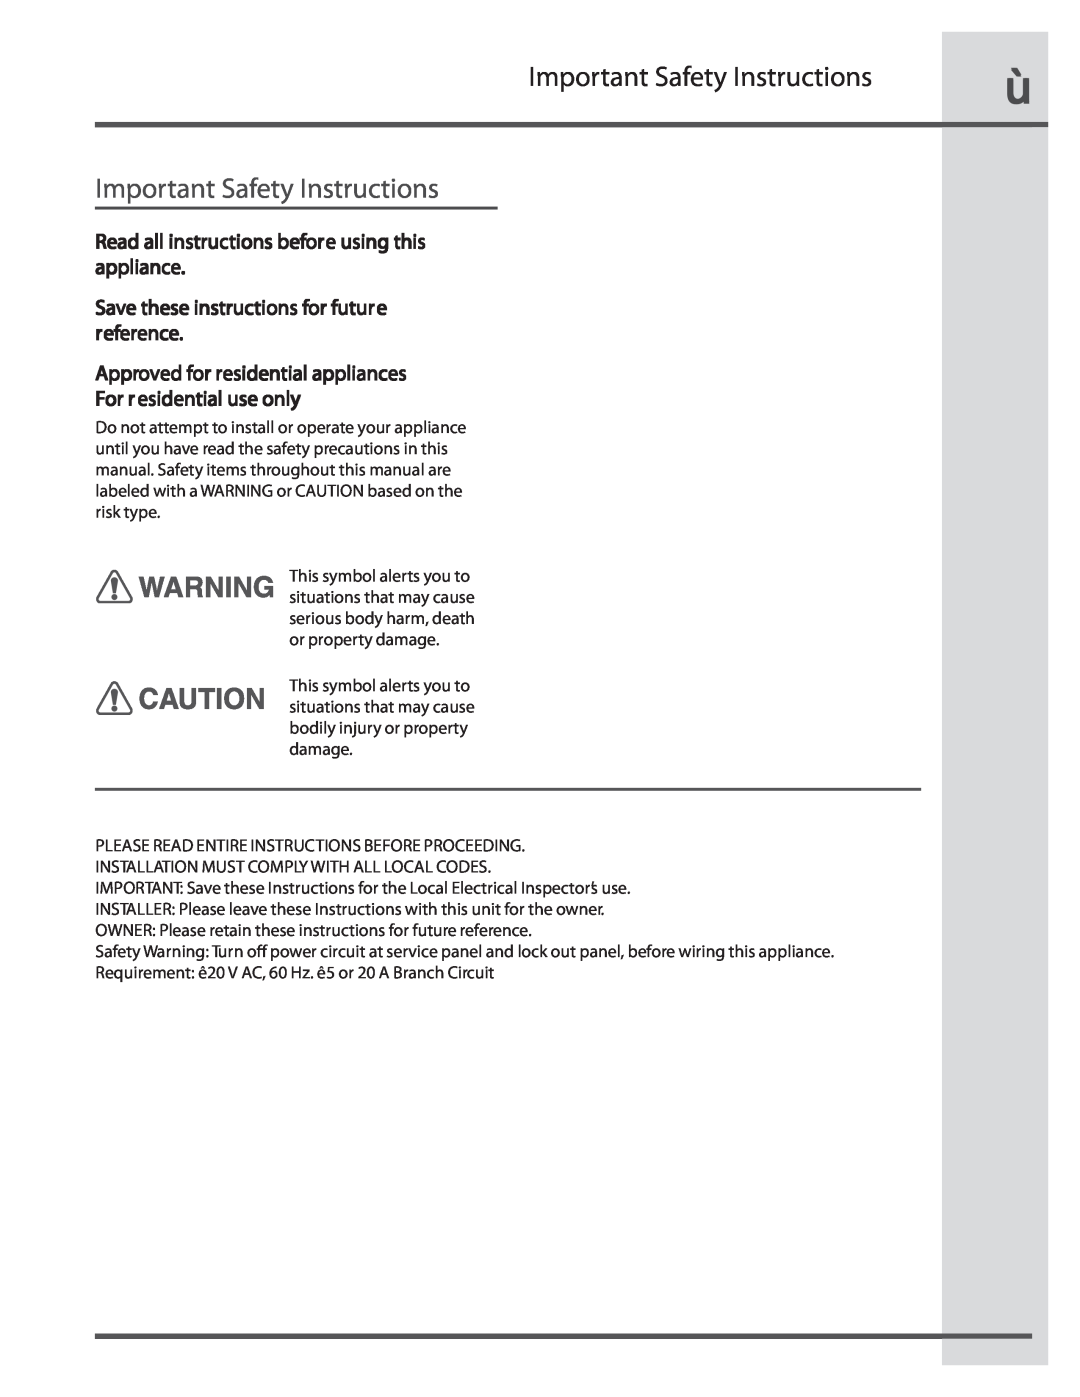 Electrolux RH30WC55GSB manual Important Safety Instructions, Read all instructions before using this appliance 